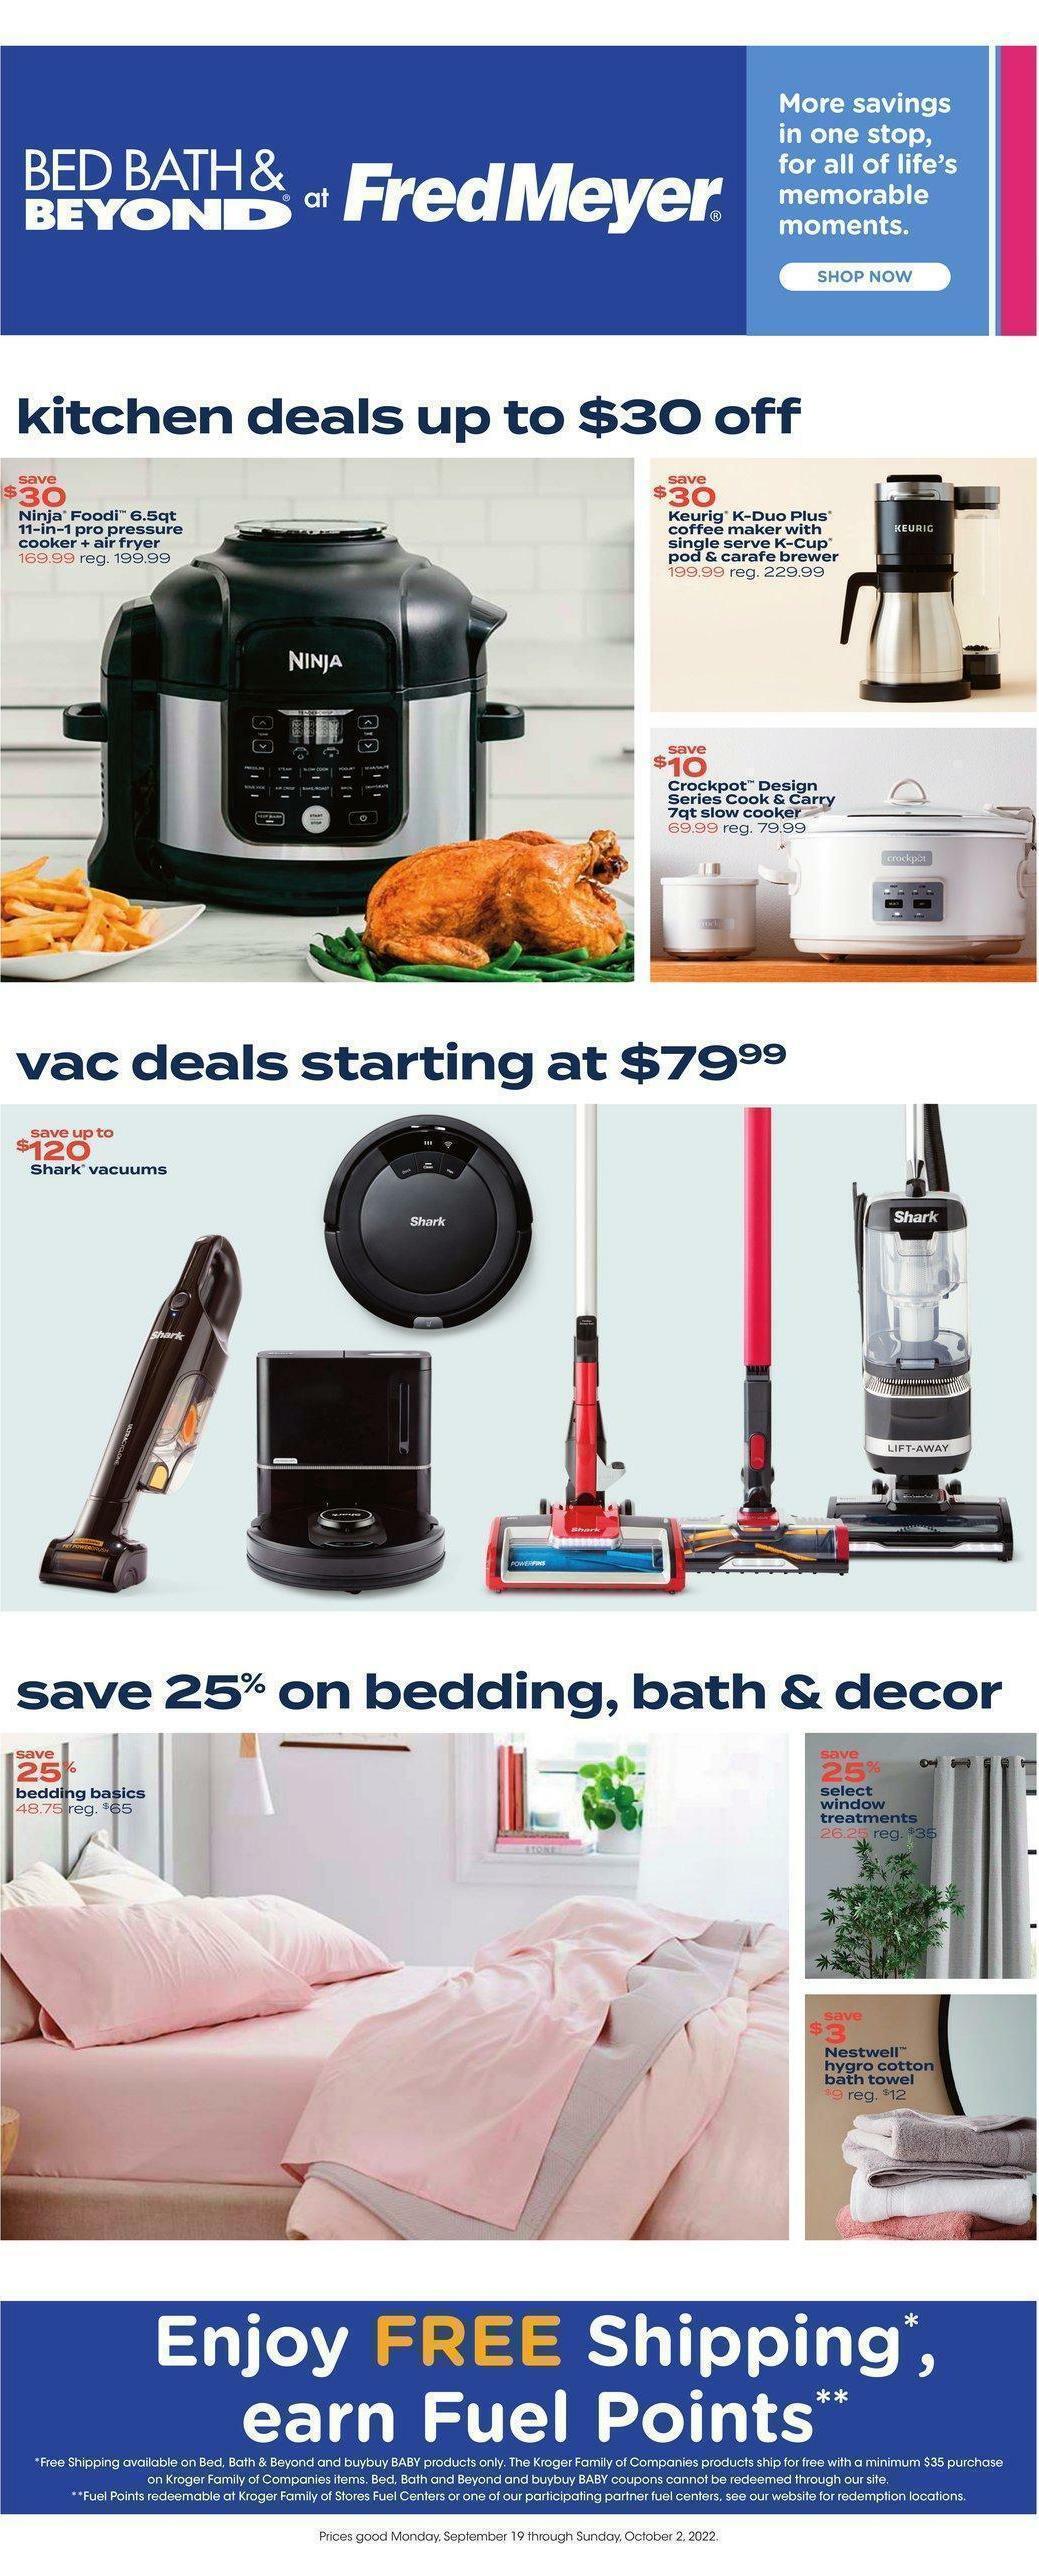 Fred Meyer Bed, Bath & Beyond Weekly Ad from September 19